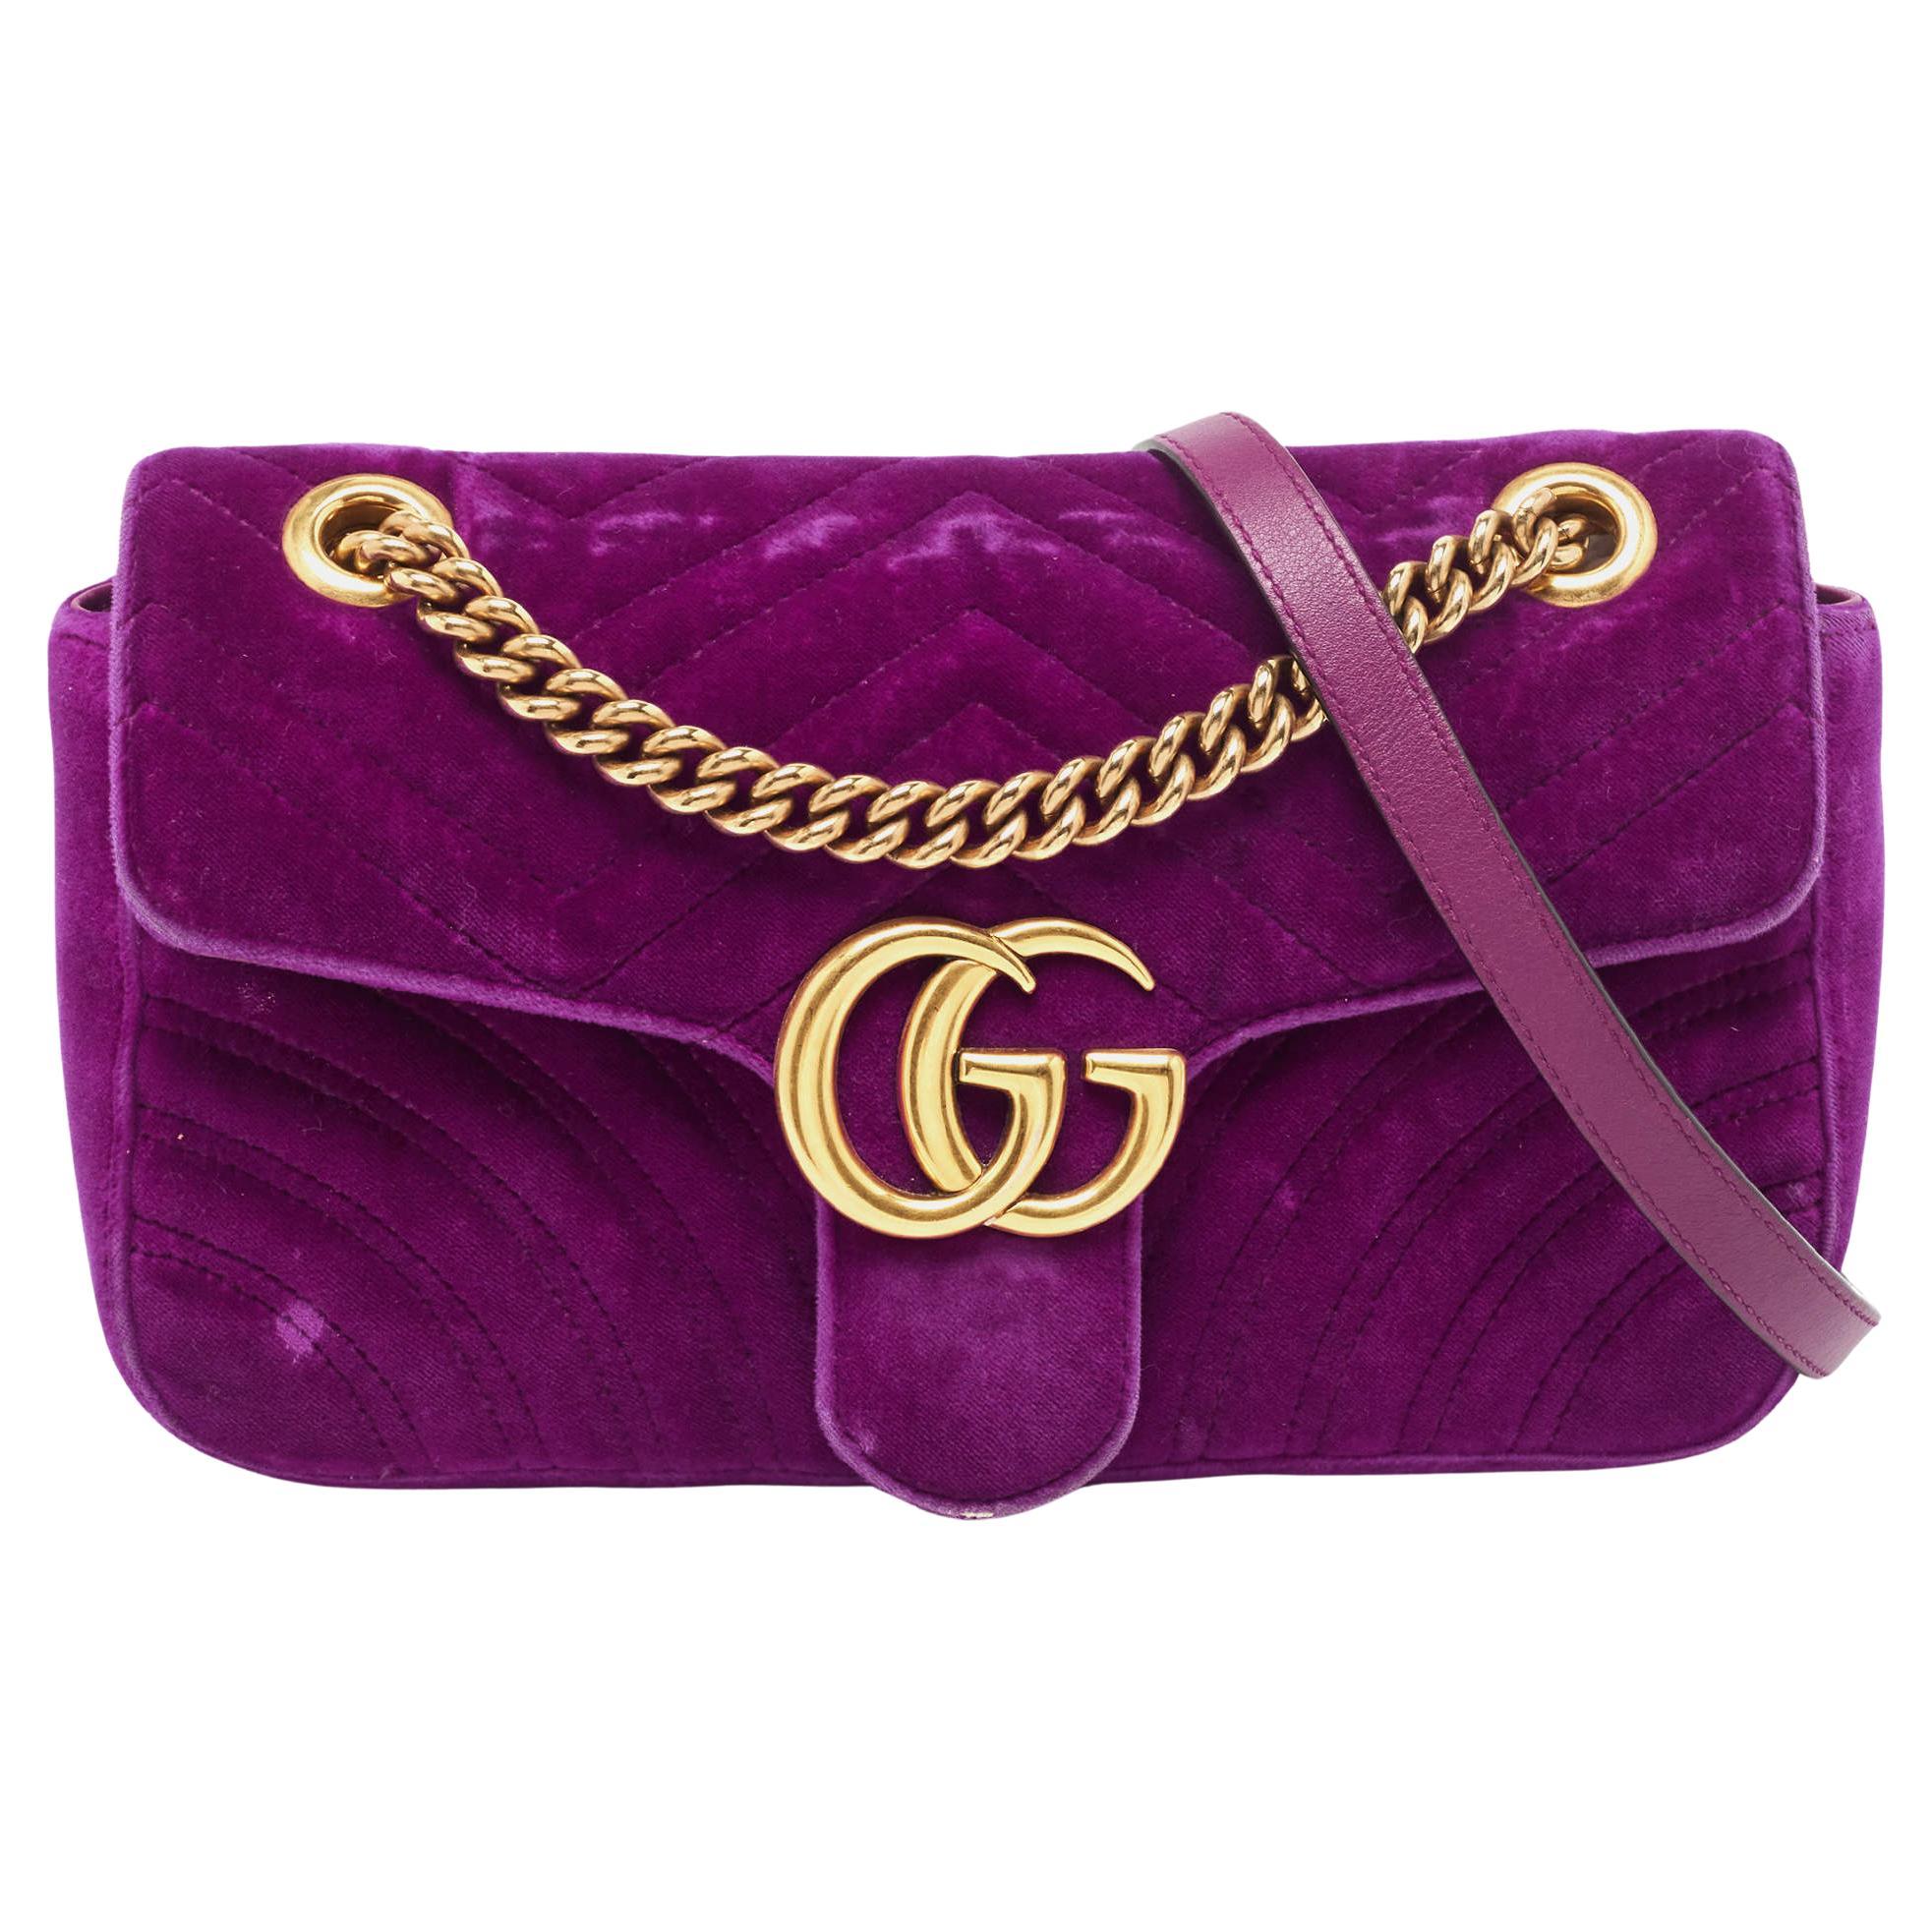 Is the Gucci Marmont bag worth it?